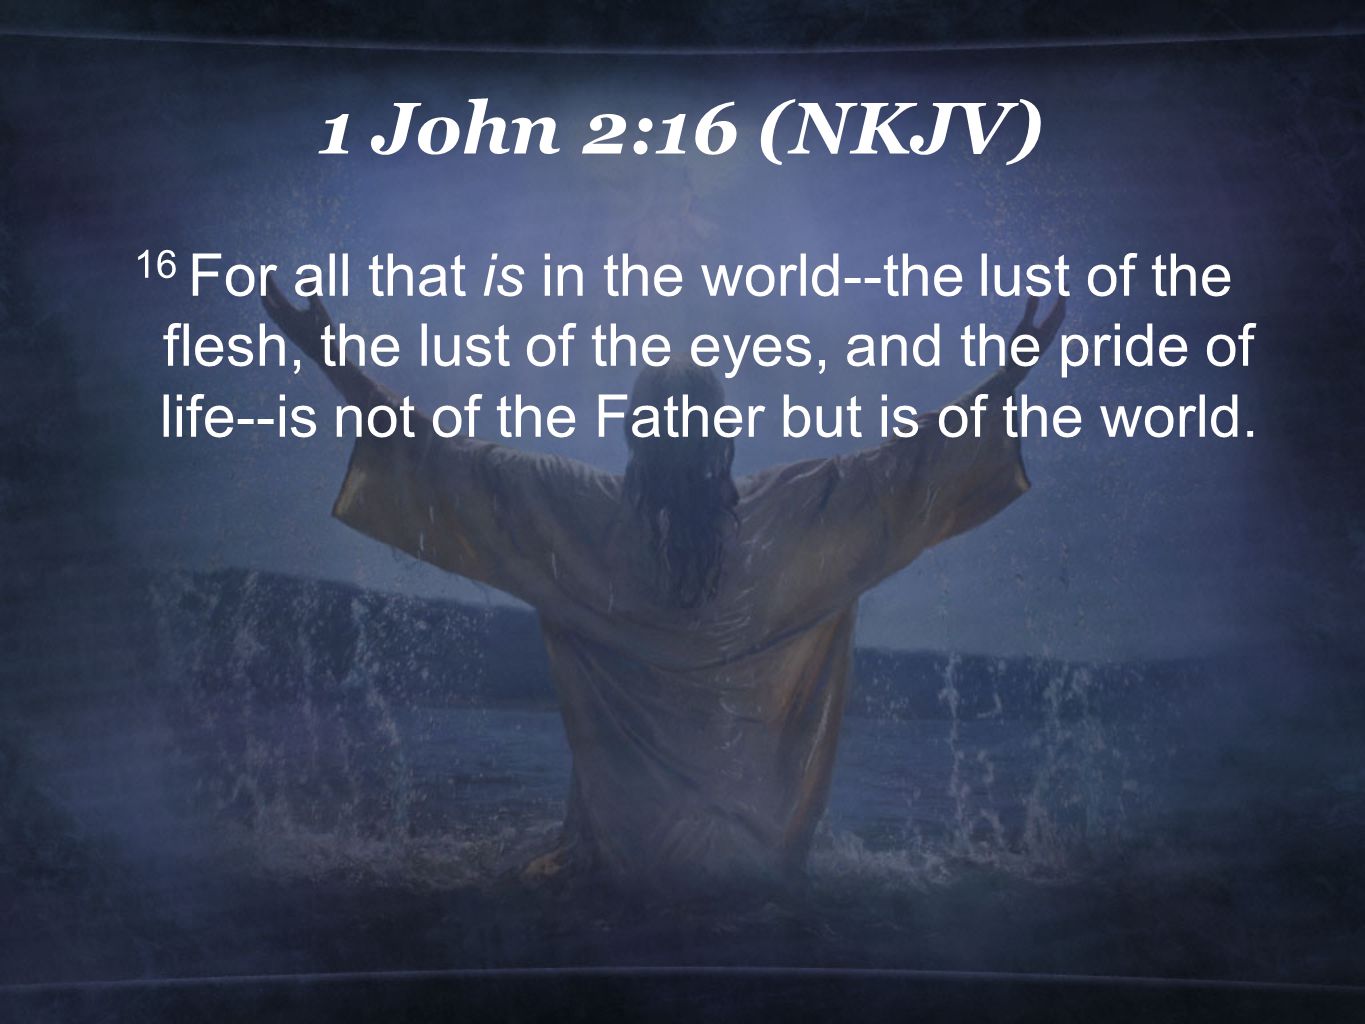 1 John 2:16 (NKJV) 16 For all that is in the world--the lust of the flesh, the lust of the eyes, and the pride of life--is not of the Father but is of the world.